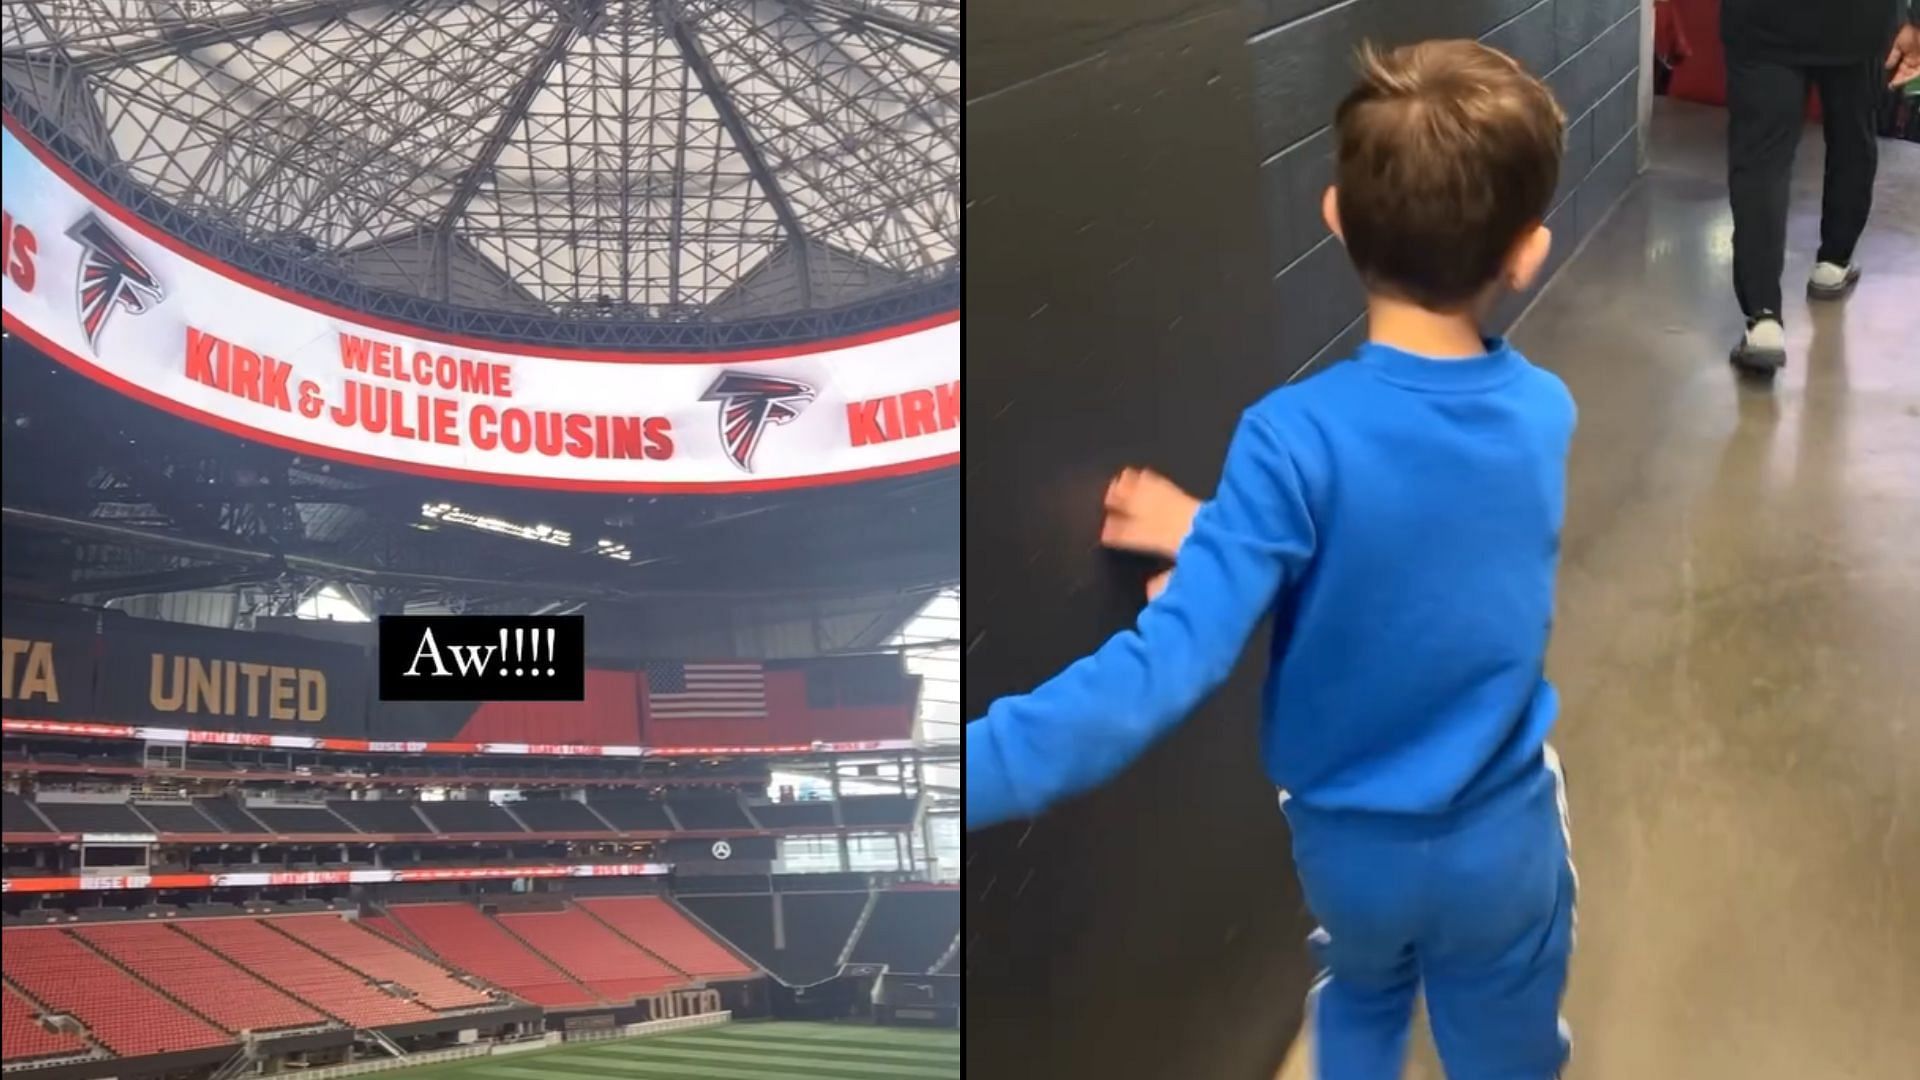 Kirk Cousins and his family viewing the Falcons&#039; welcome banner at Mercedes-Benz Stadium